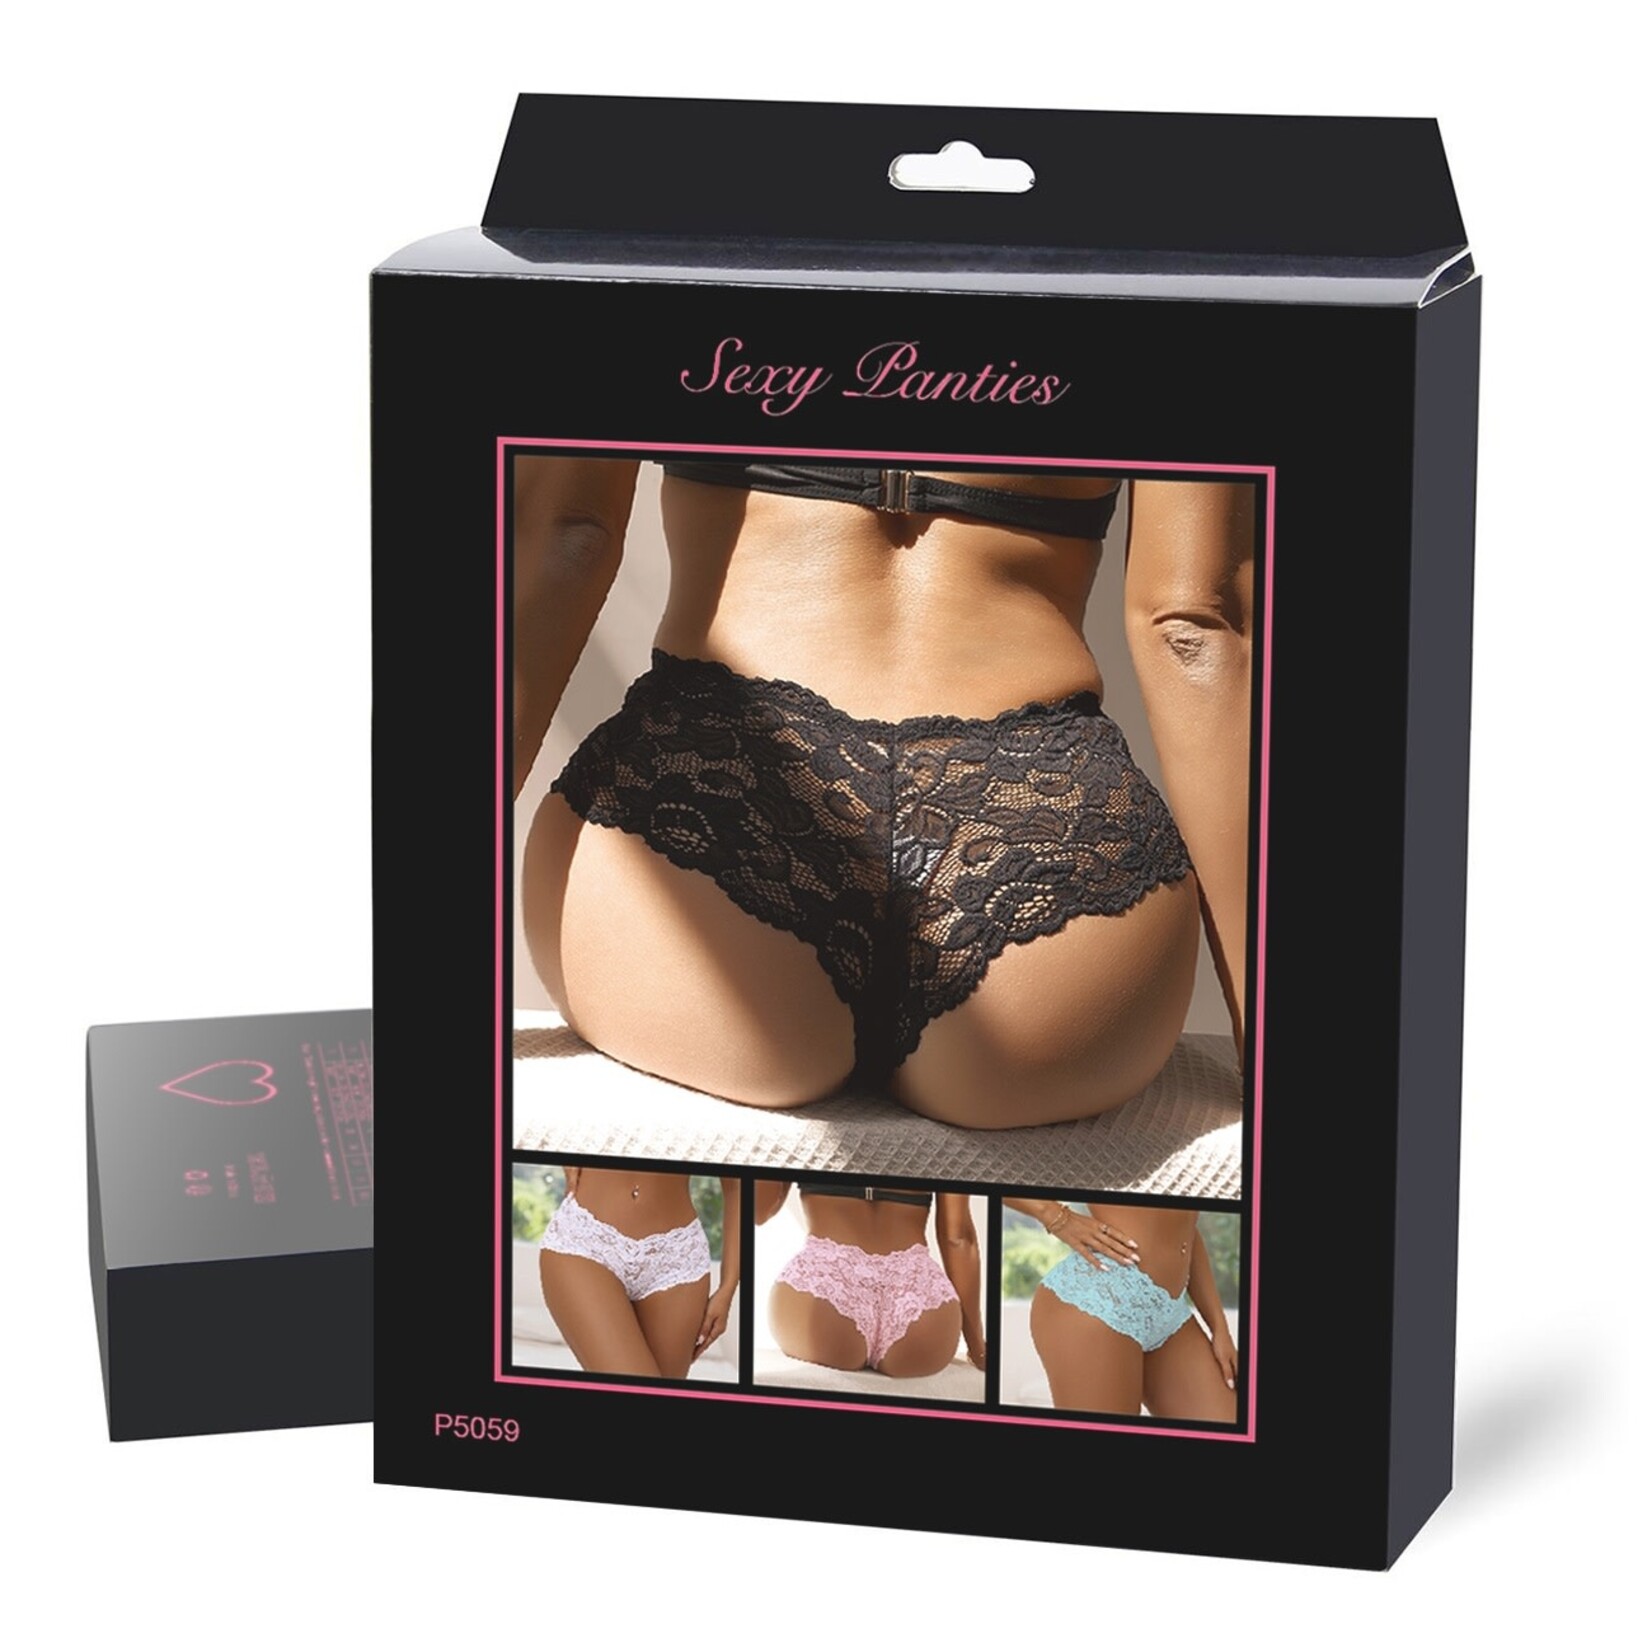 OH YEAH! -  BLACK SEXY FLORAL LACE PANTY S-M